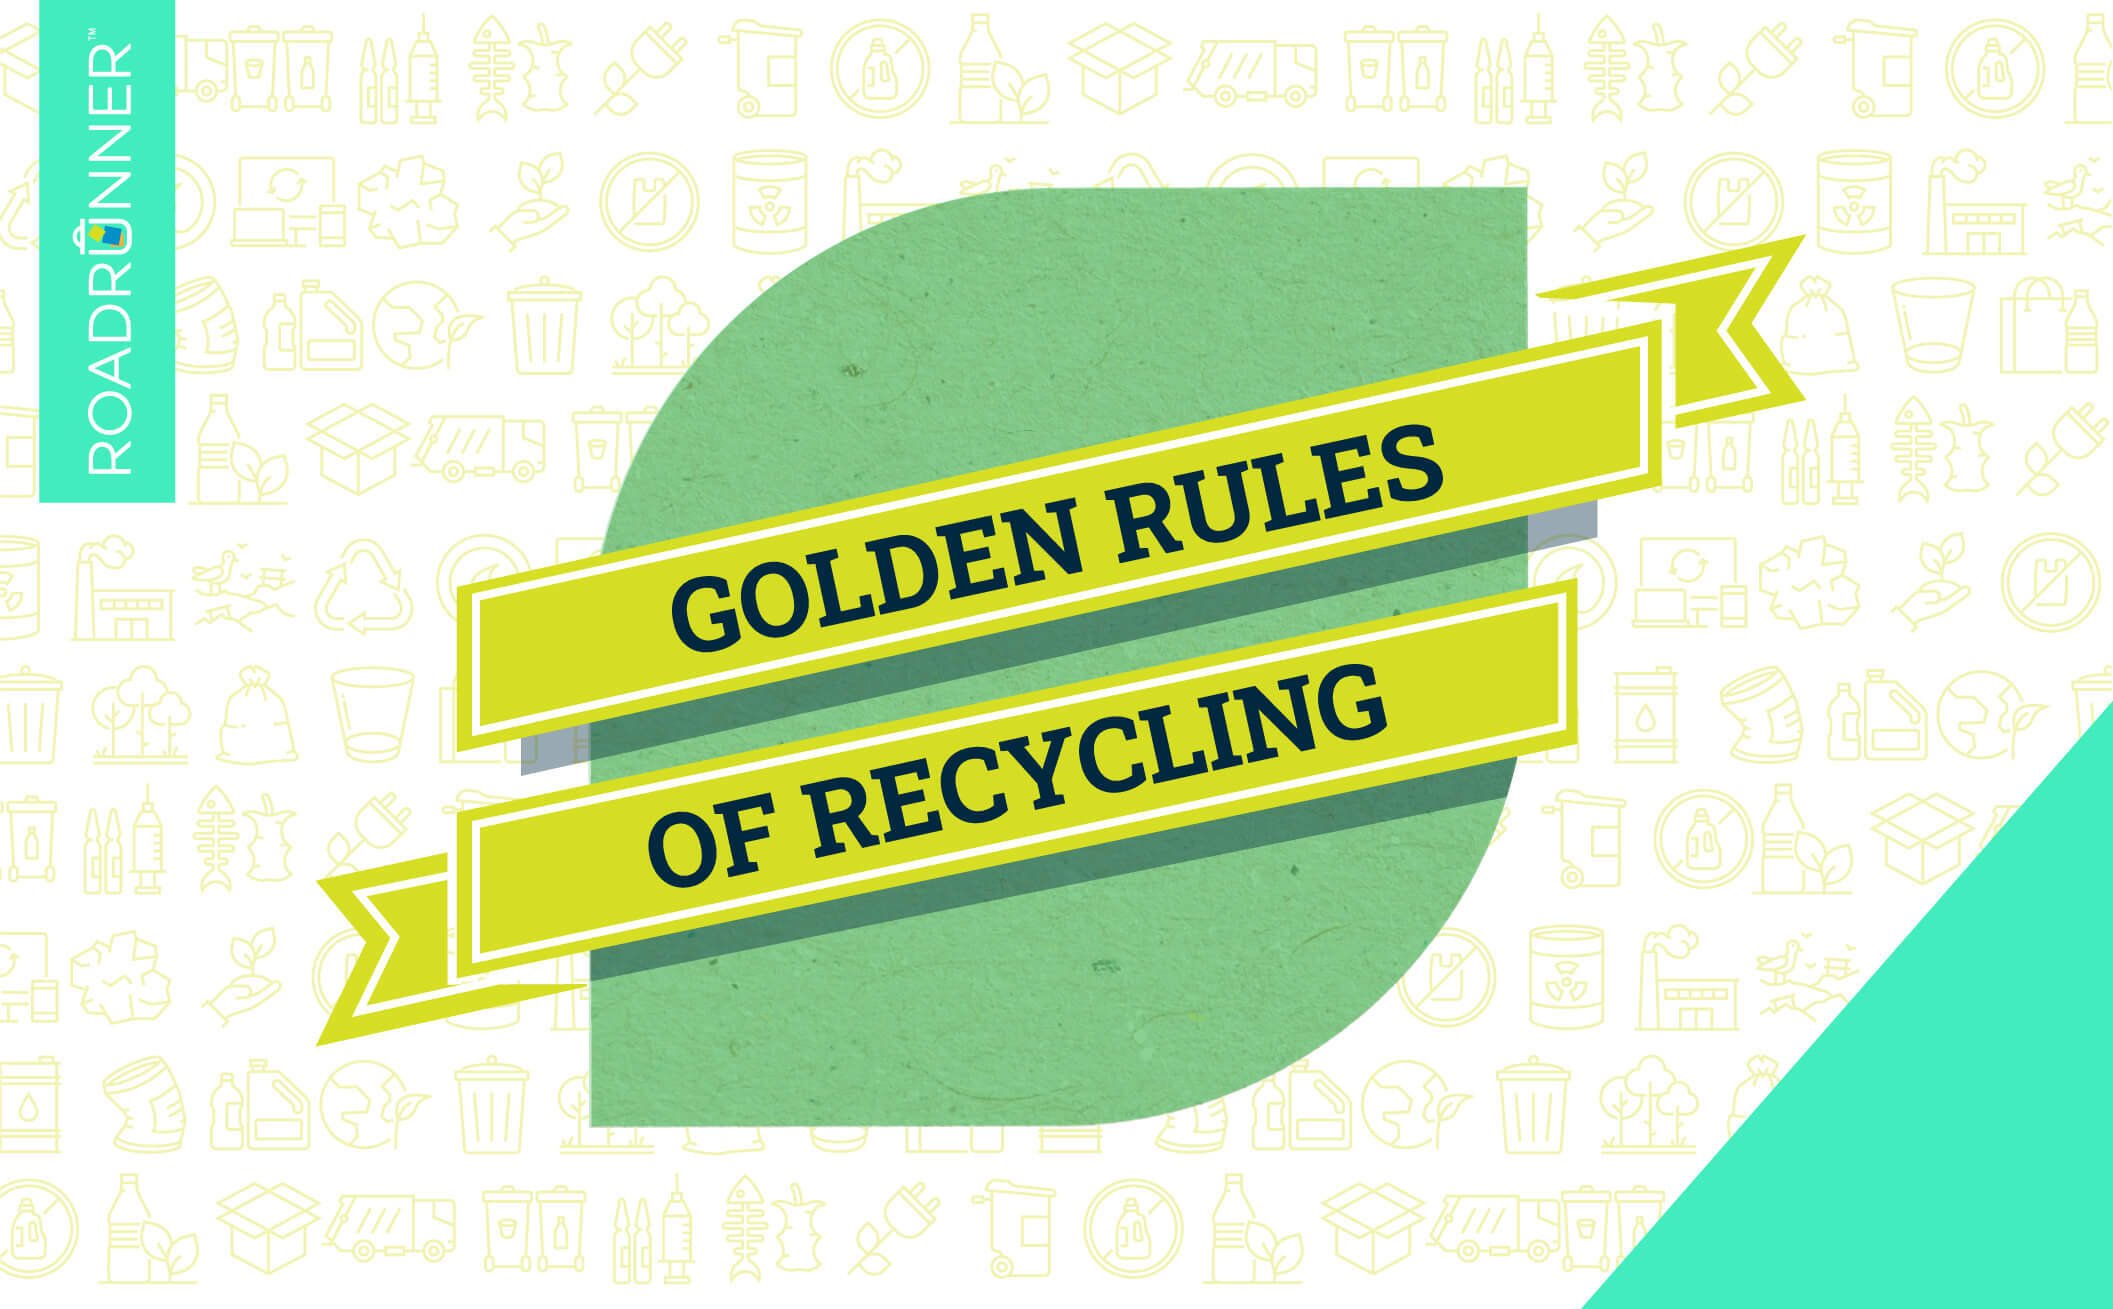 The Golden Rules of Recycling